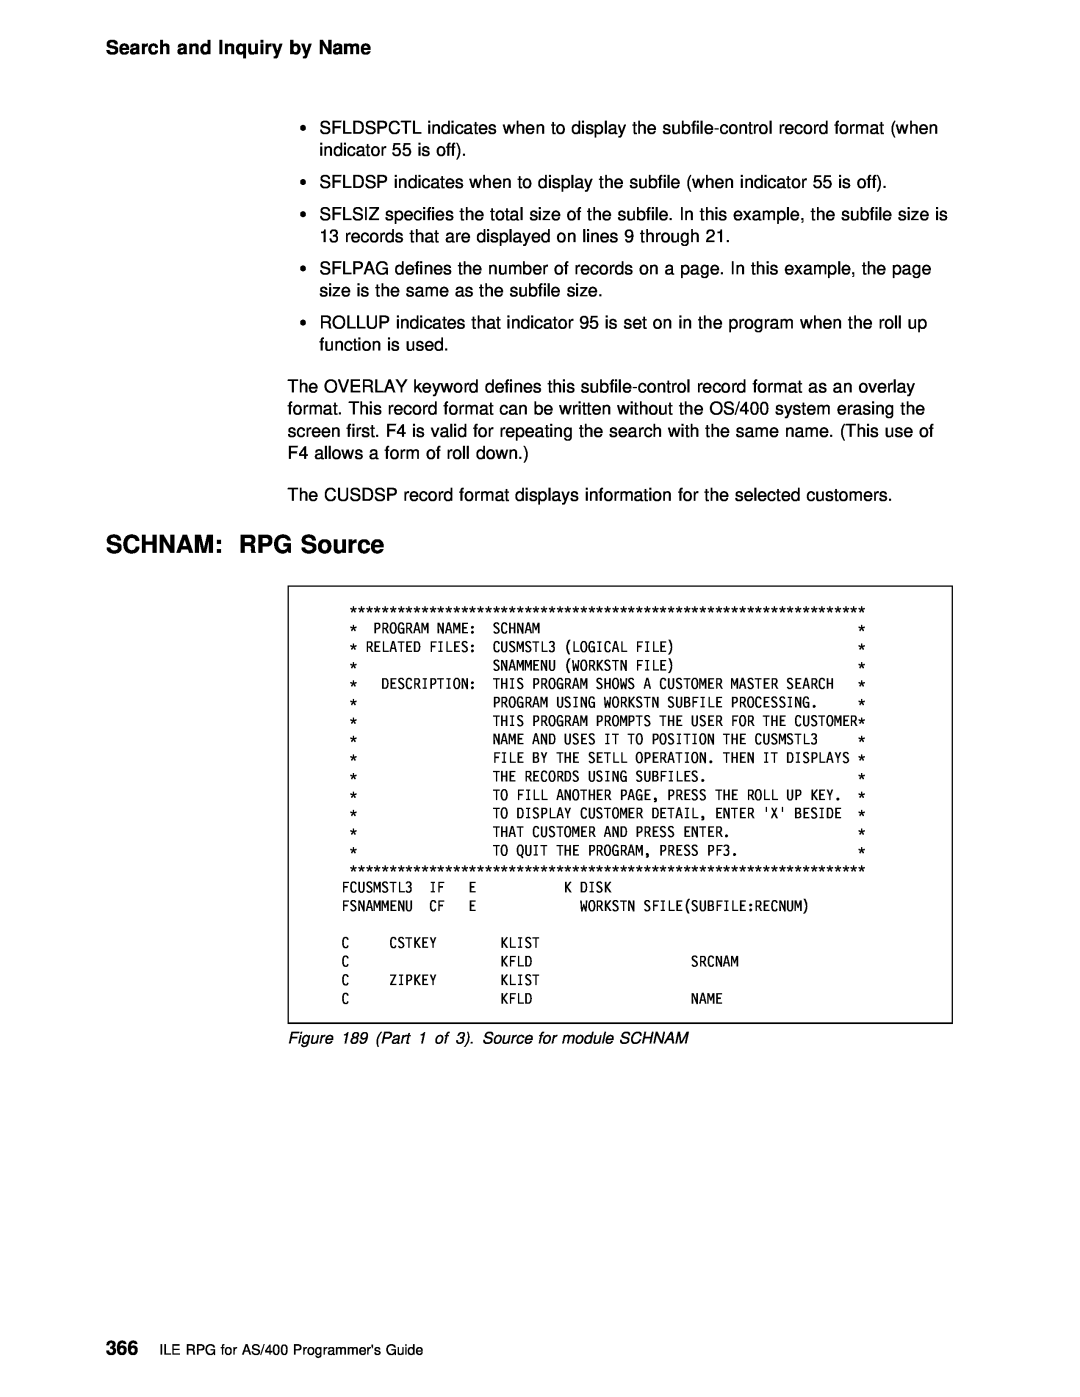 IBM AS/400 manual SCHNAM RPG Source, Search and Inquiry by Name 